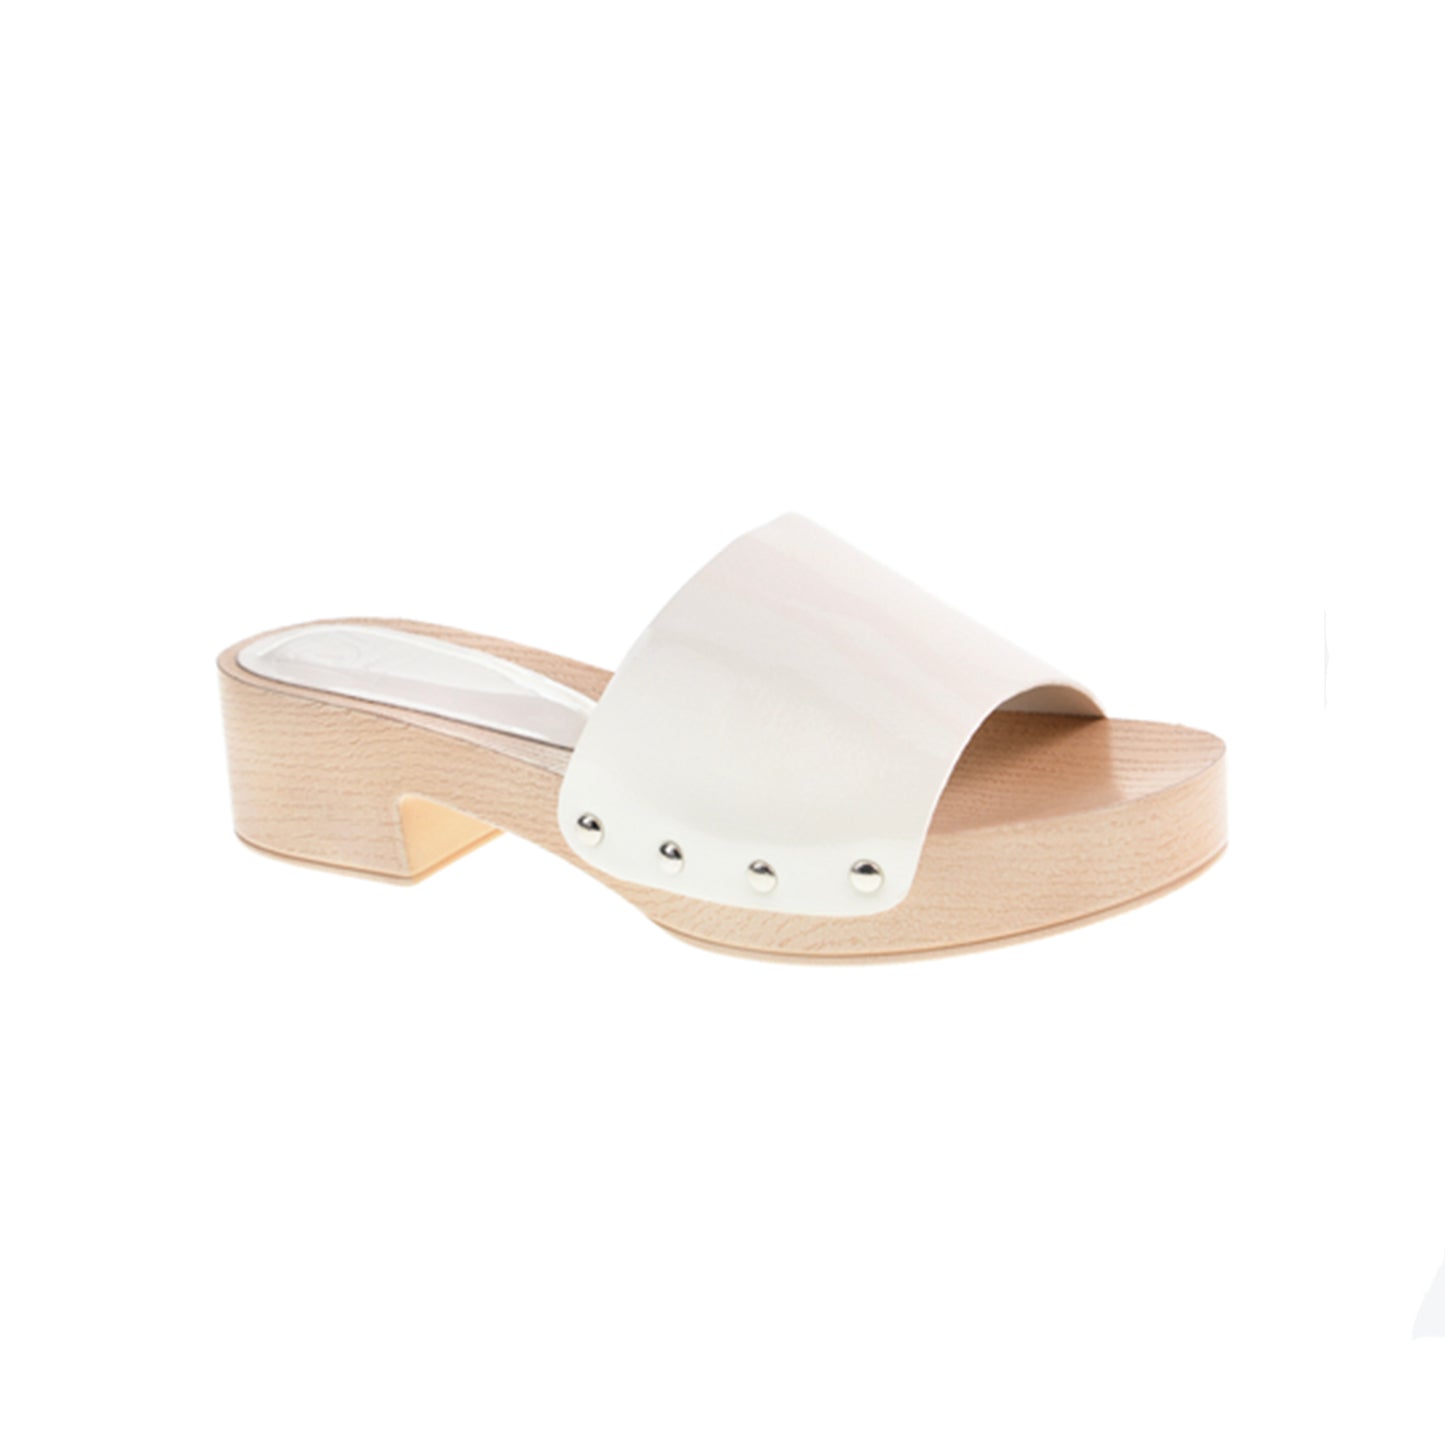 Chinese Laundry Heidi Cloud Sandal. A wooden platform heel and studded details at the strap define a clog-inspired sandal that's perfect for sunny-weather outfits